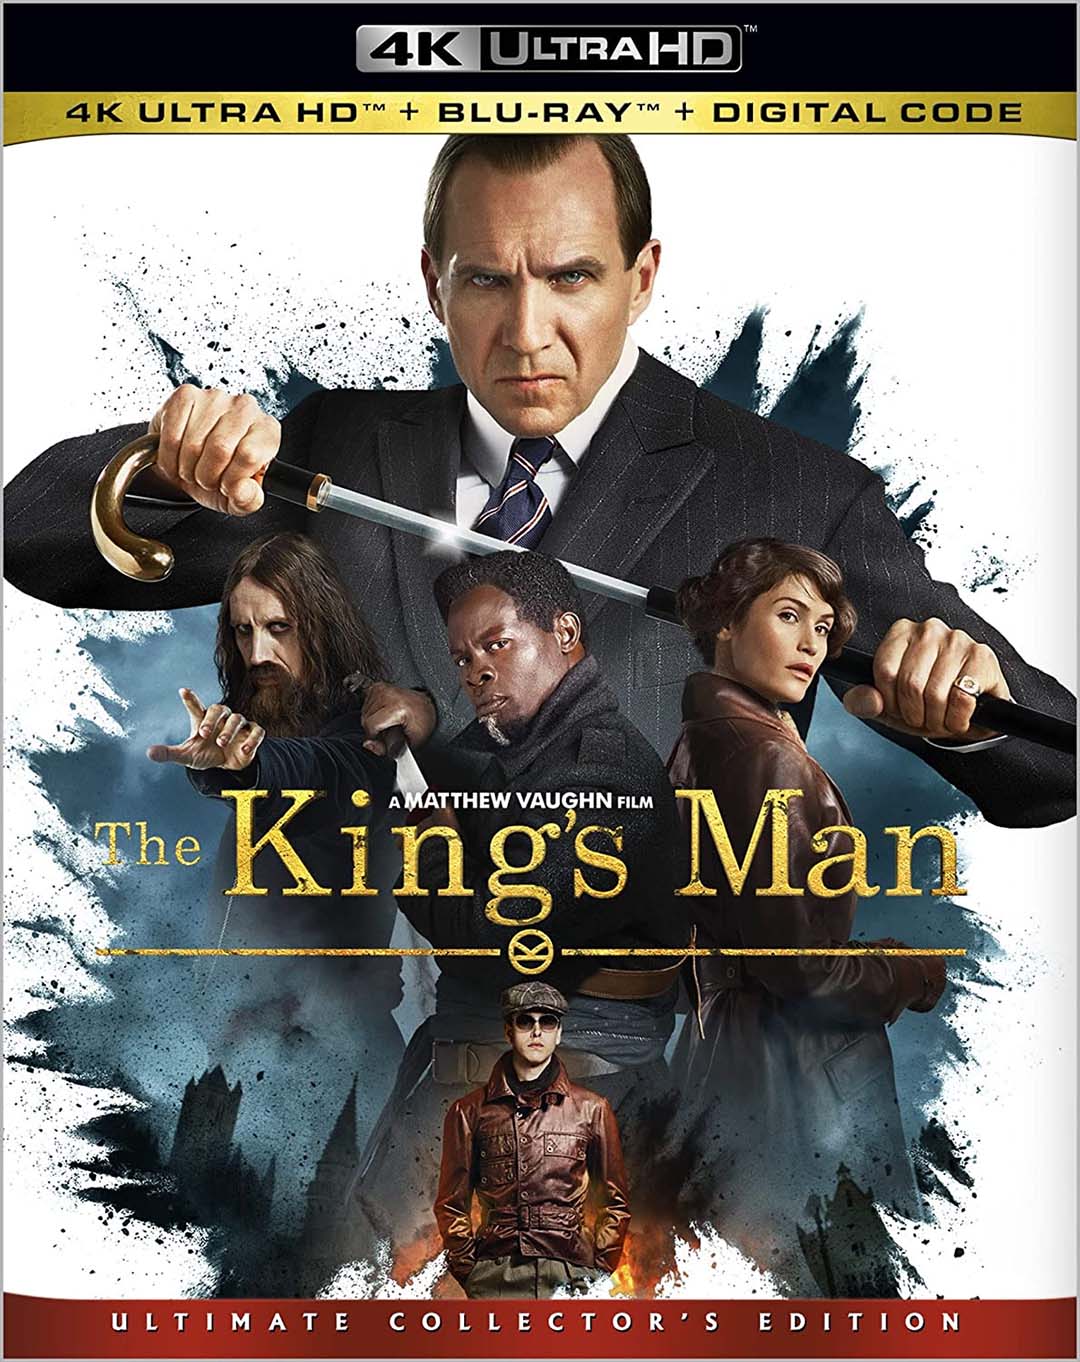 The Kings Man 4k Blu-ray front